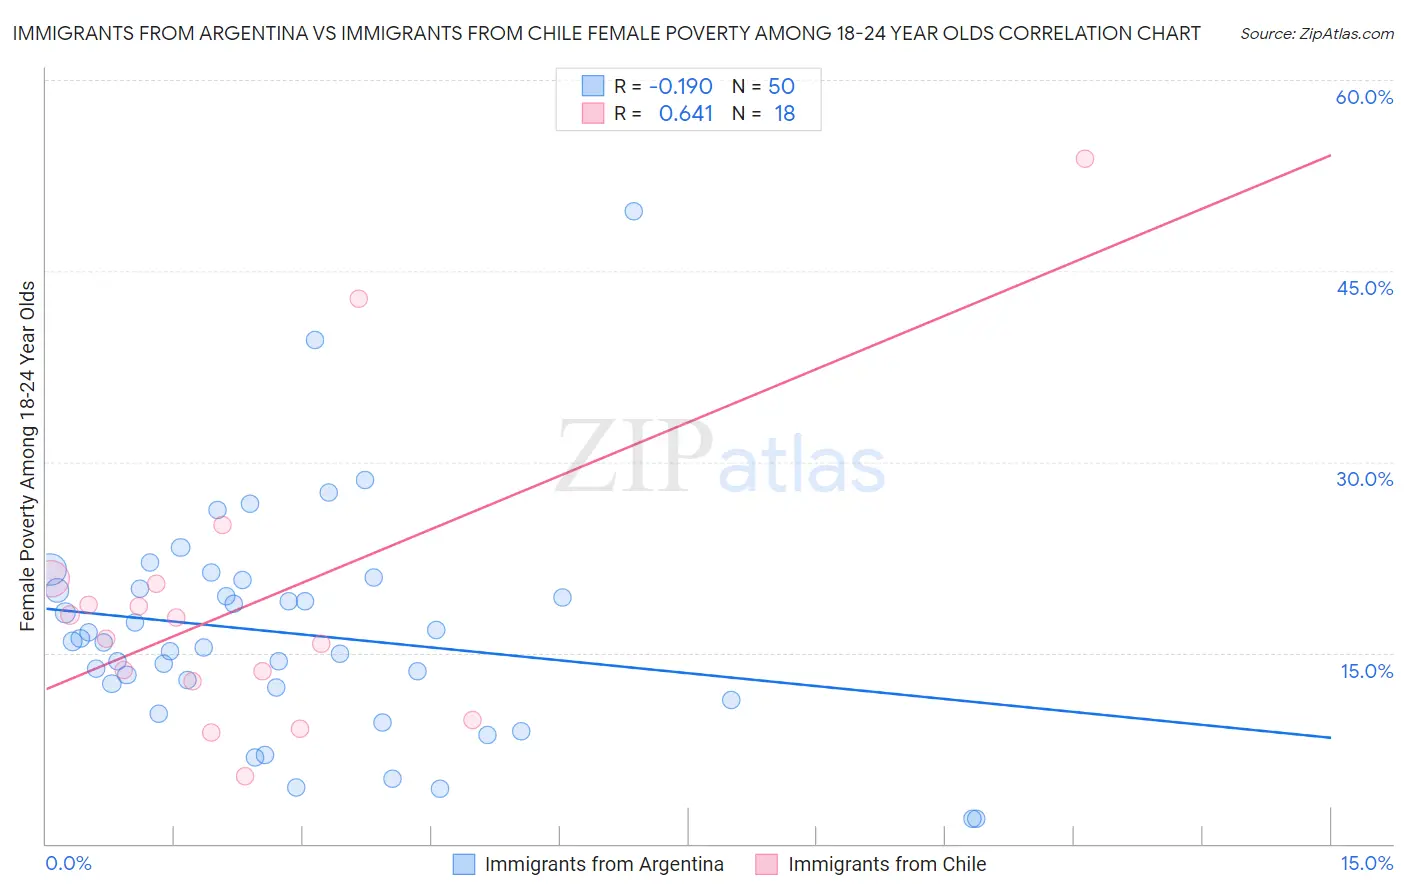 Immigrants from Argentina vs Immigrants from Chile Female Poverty Among 18-24 Year Olds